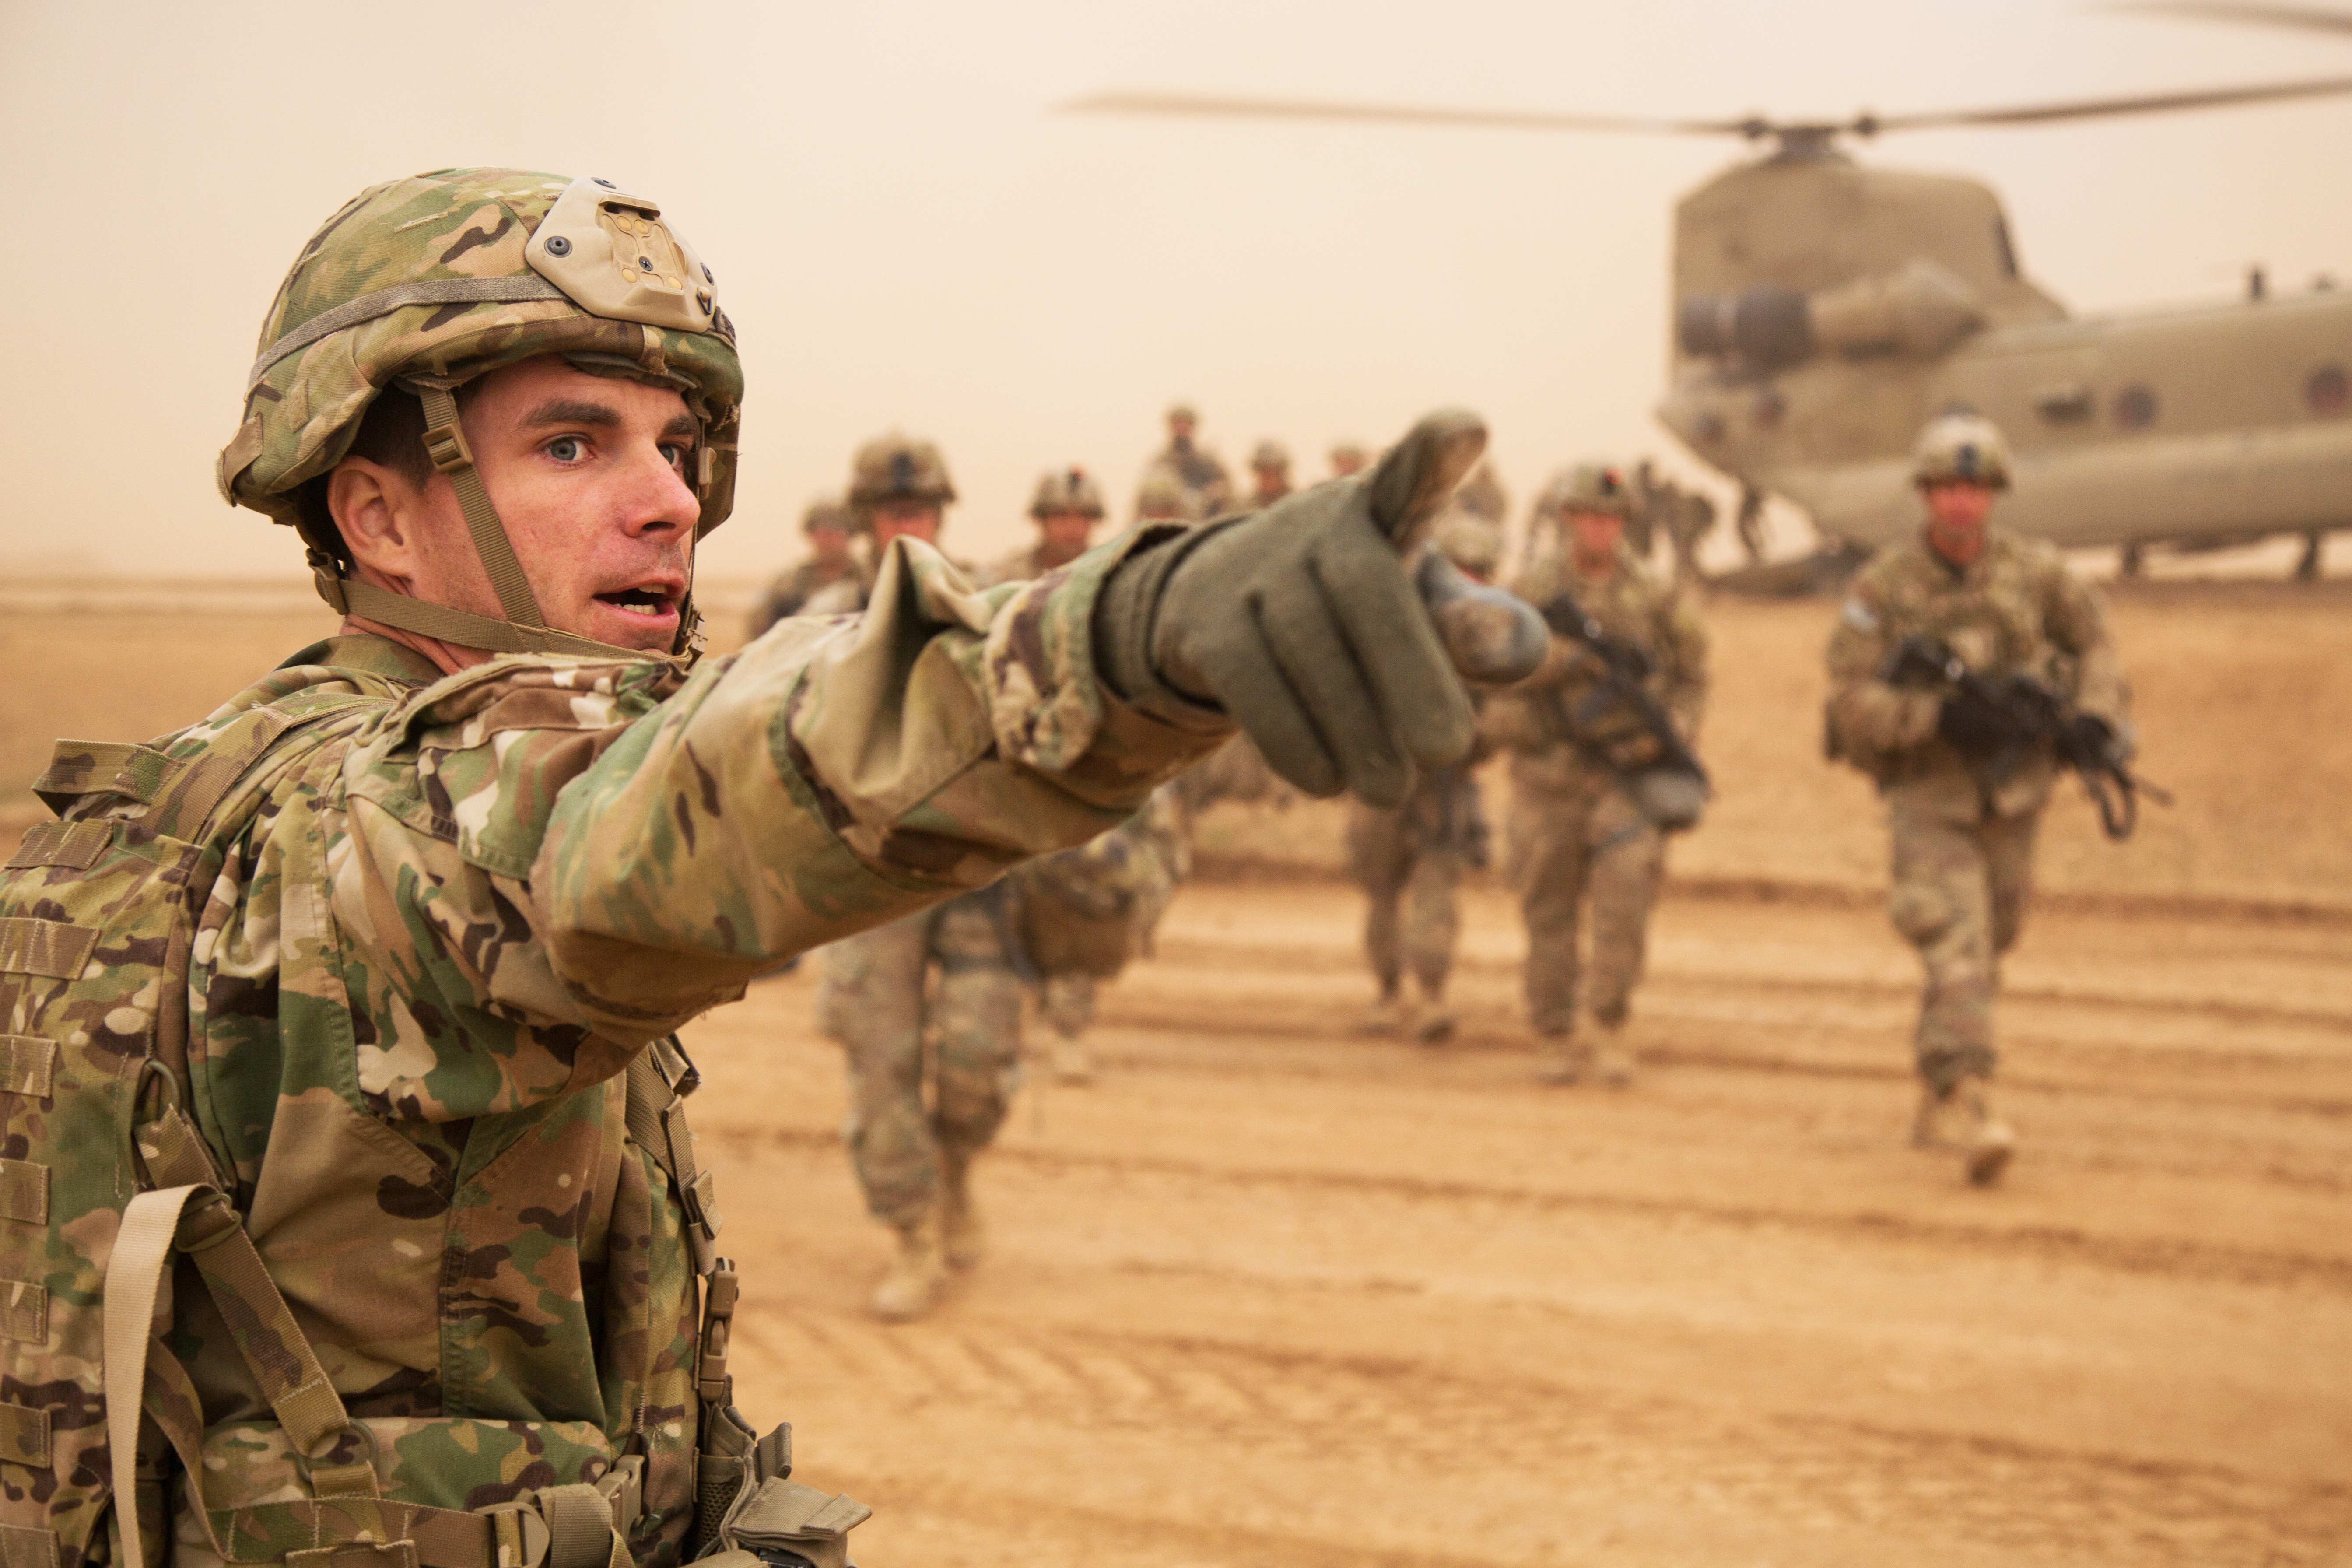 U.S. Army Cpt. Andrew Roberts directs newly arrived paratroopers where to go near Mosul, Iraq, Feb. 5, 2017.